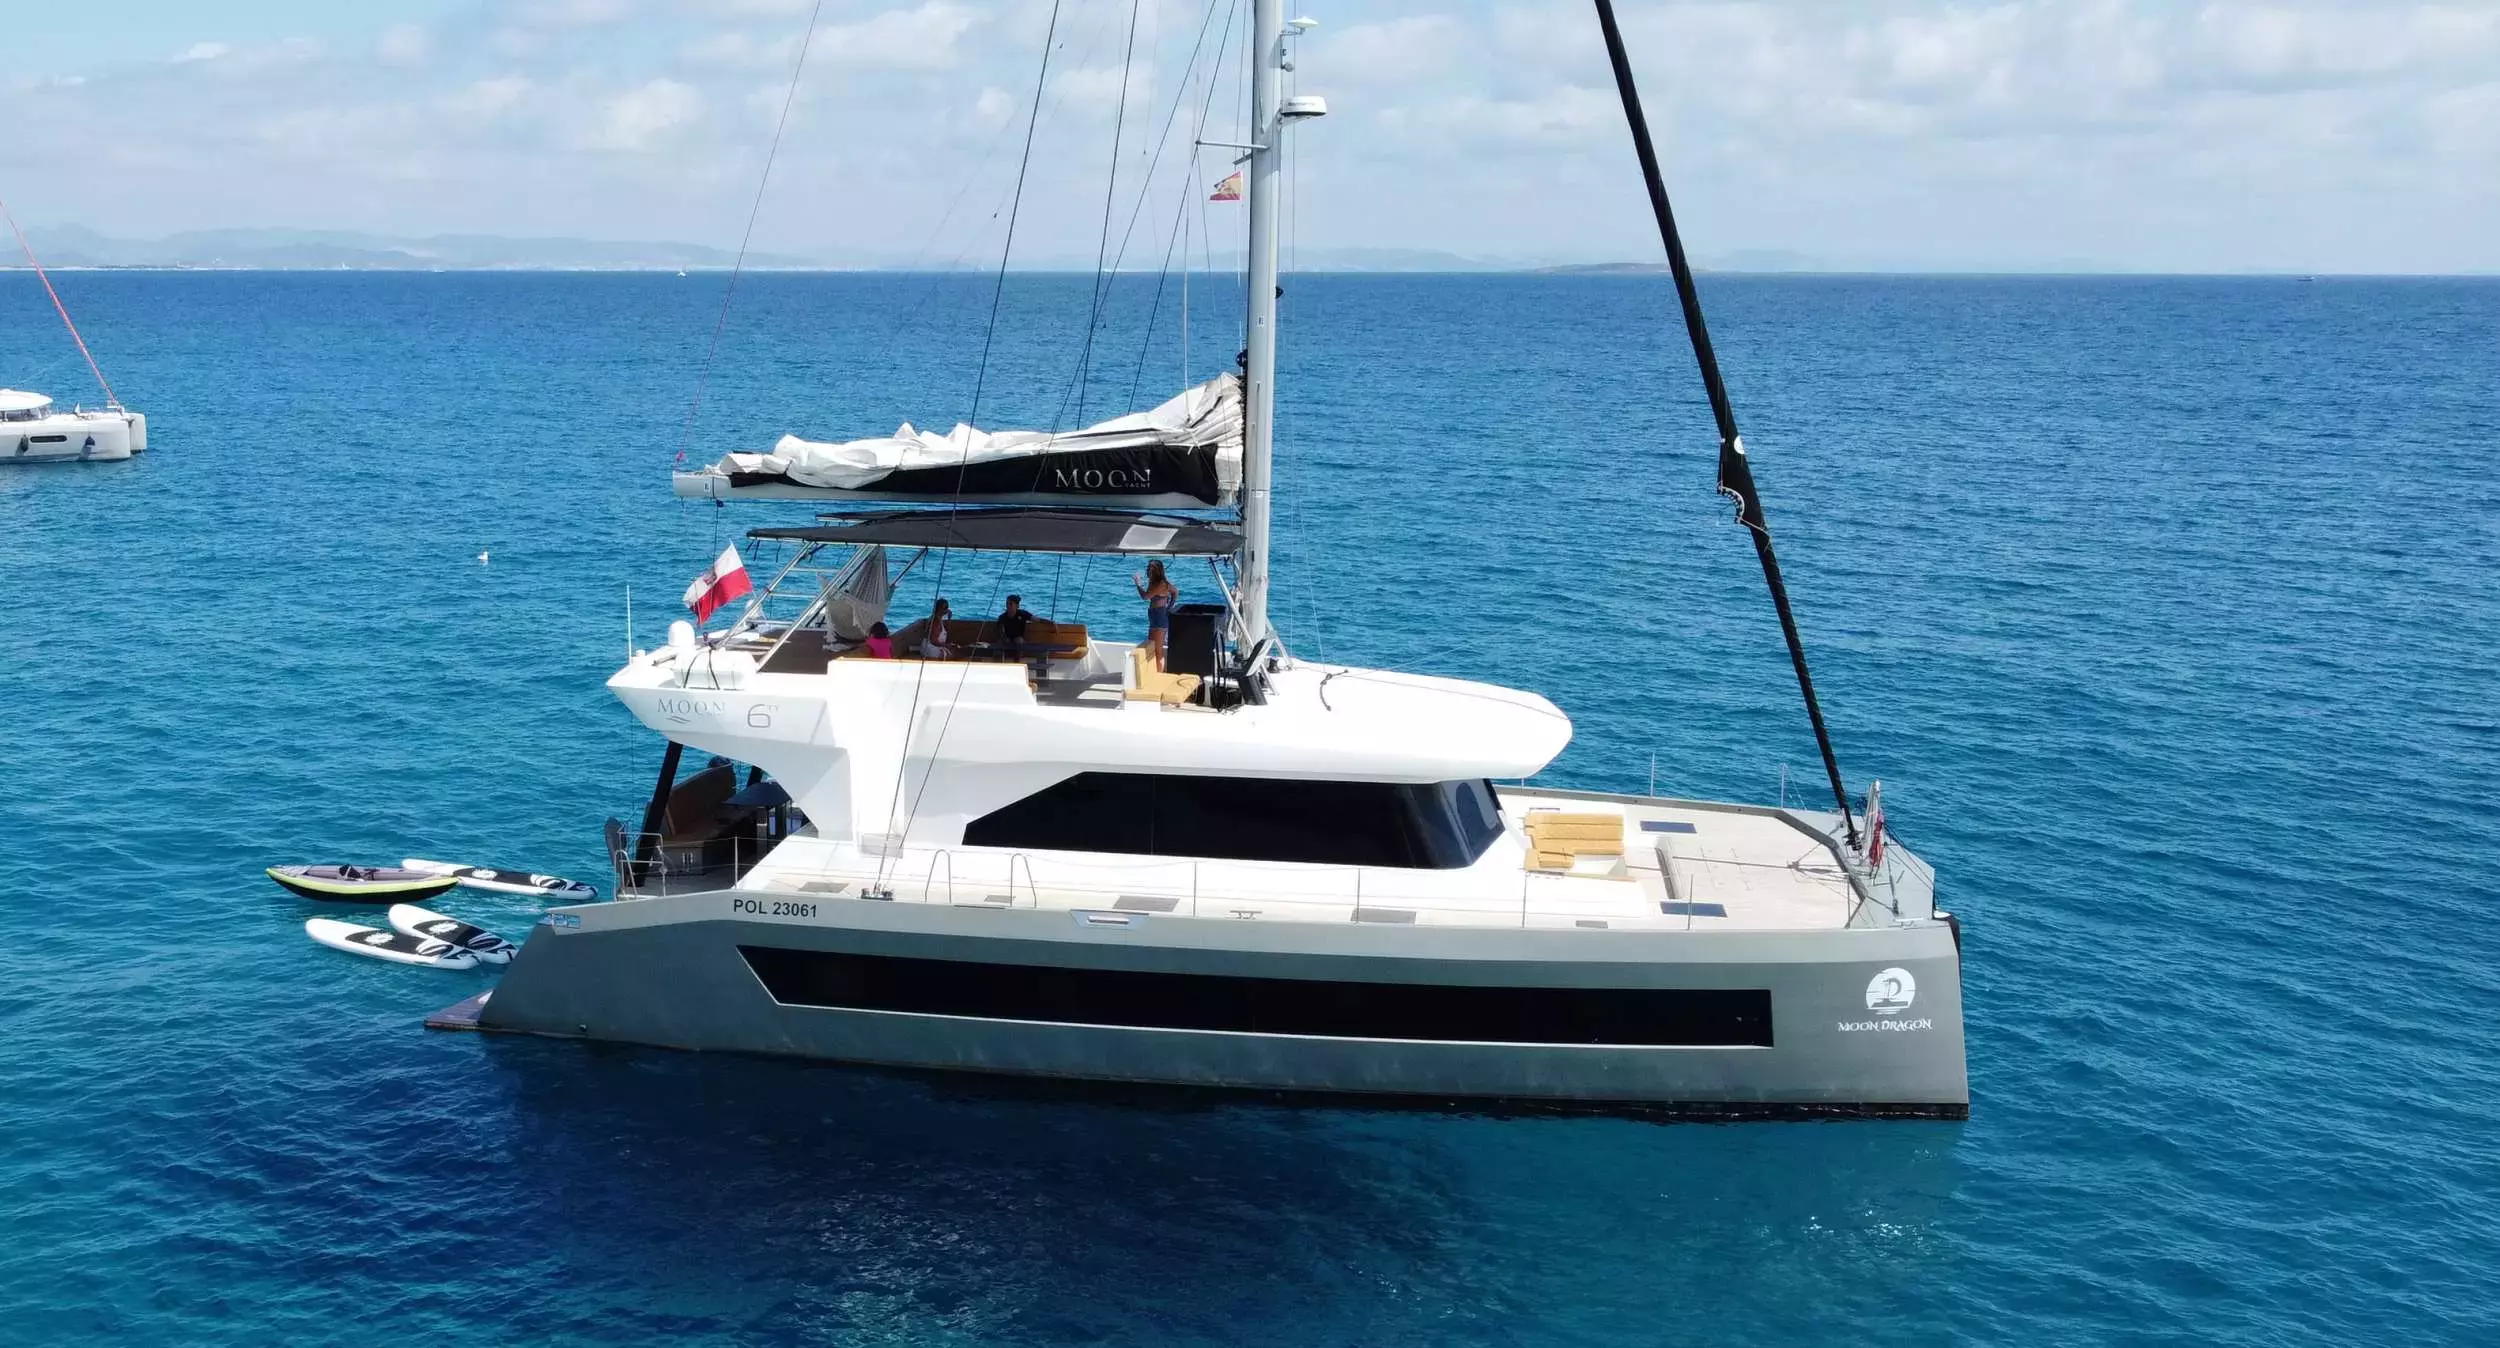 Moon Dragon by Moon - Top rates for a Charter of a private Luxury Catamaran in Anguilla